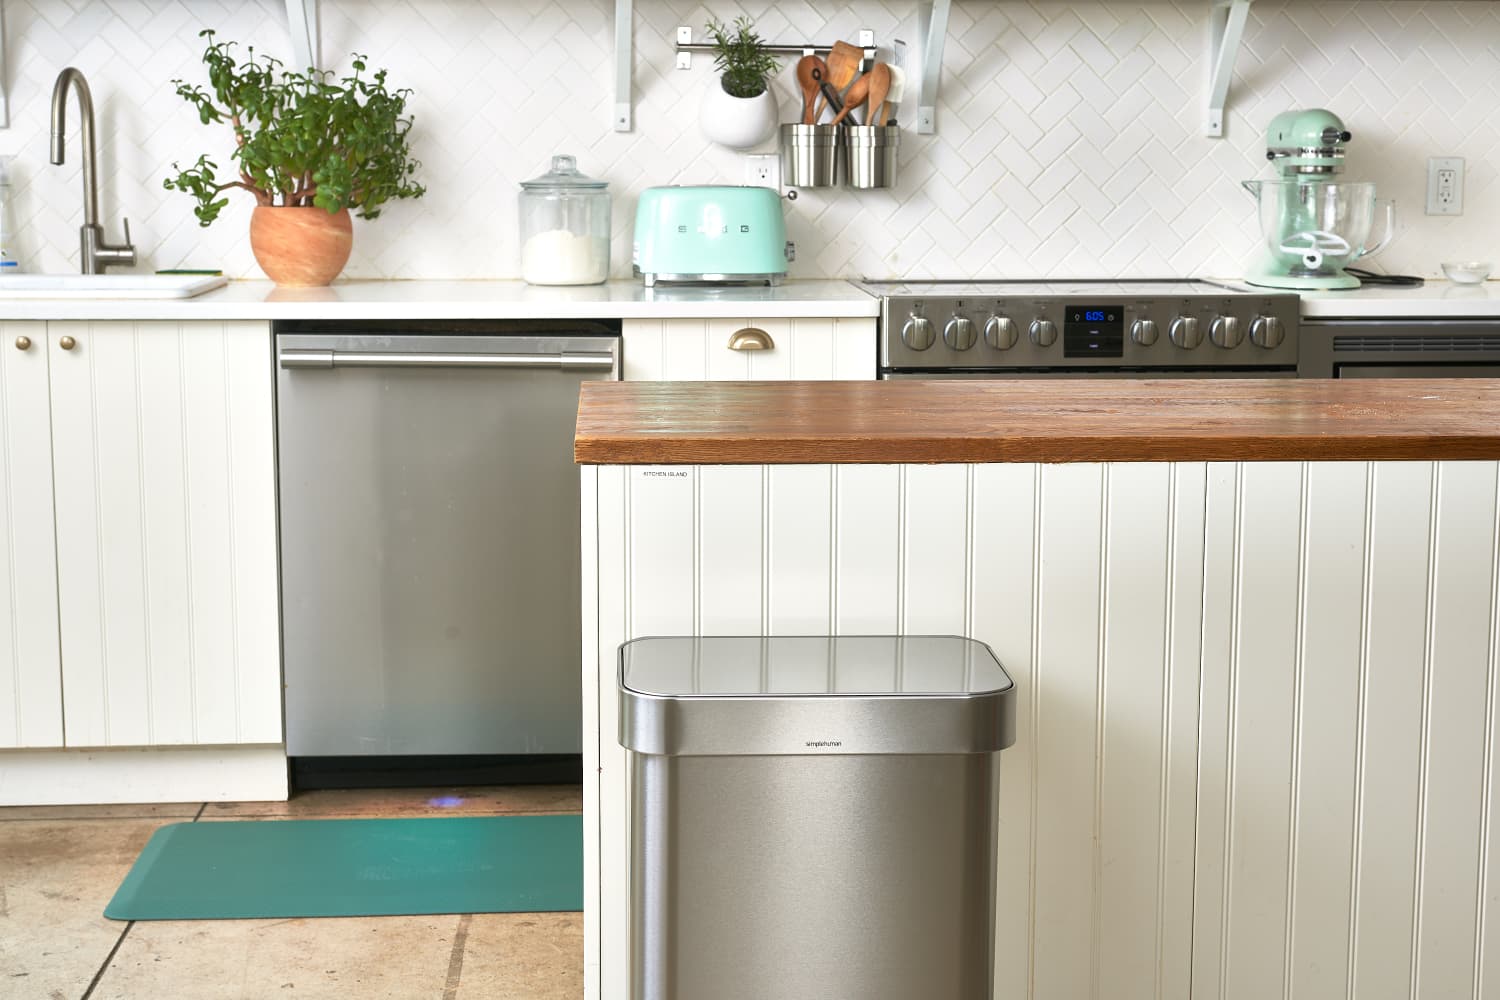 7 Smart Ways to Deodorize Your Stinky Kitchen Garbage Can, According to  Janitors